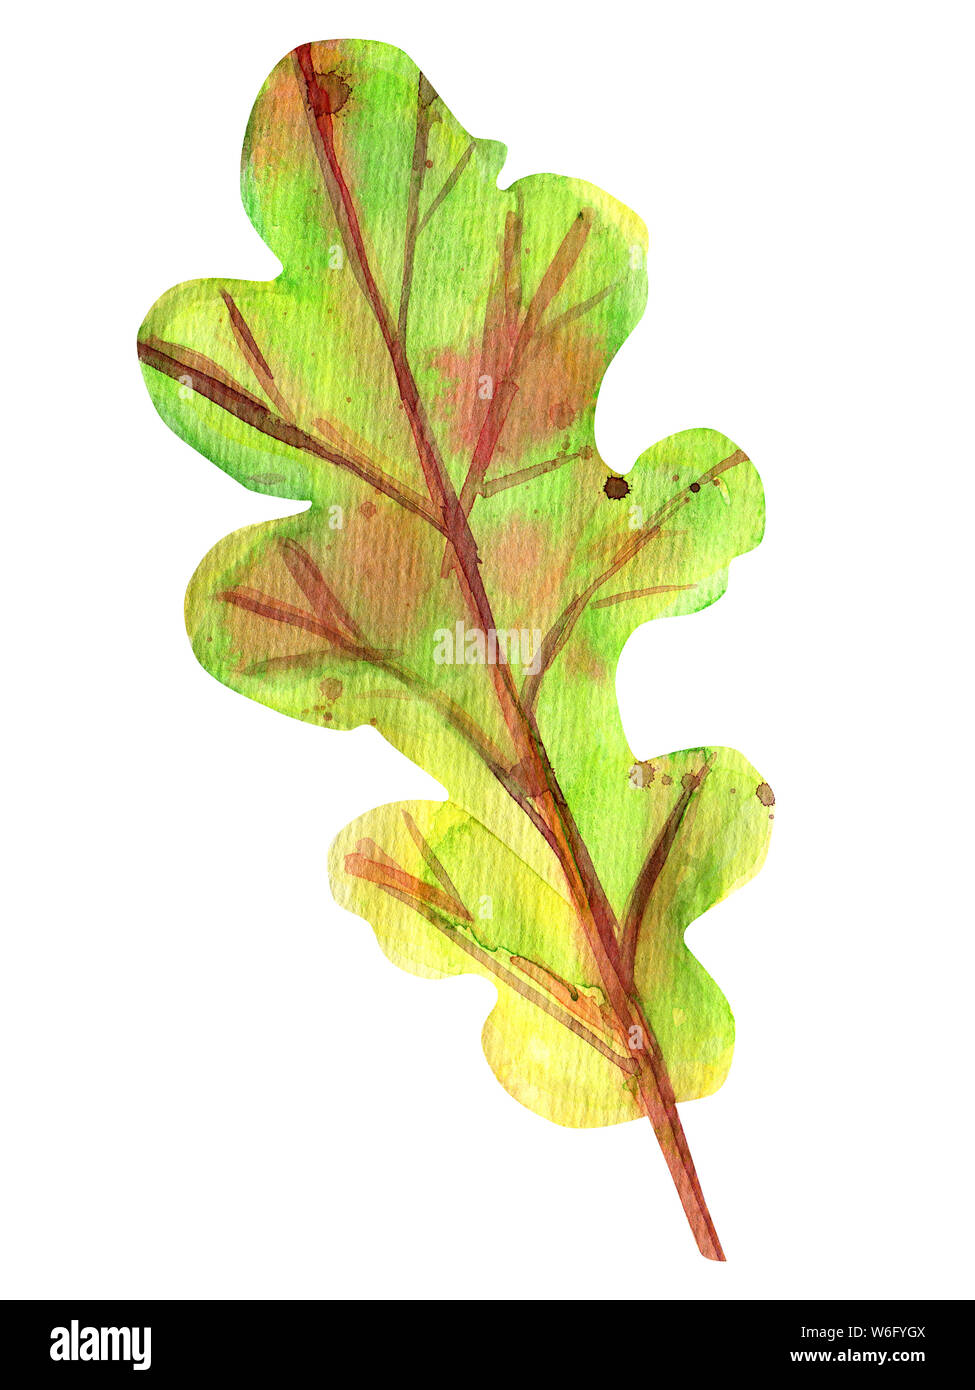 Watercolor autumn oak leaf. One fallen green leaf with yellow, orange, green, brown, ocher, red drops and splashes of color. Isolated object on white Stock Photo